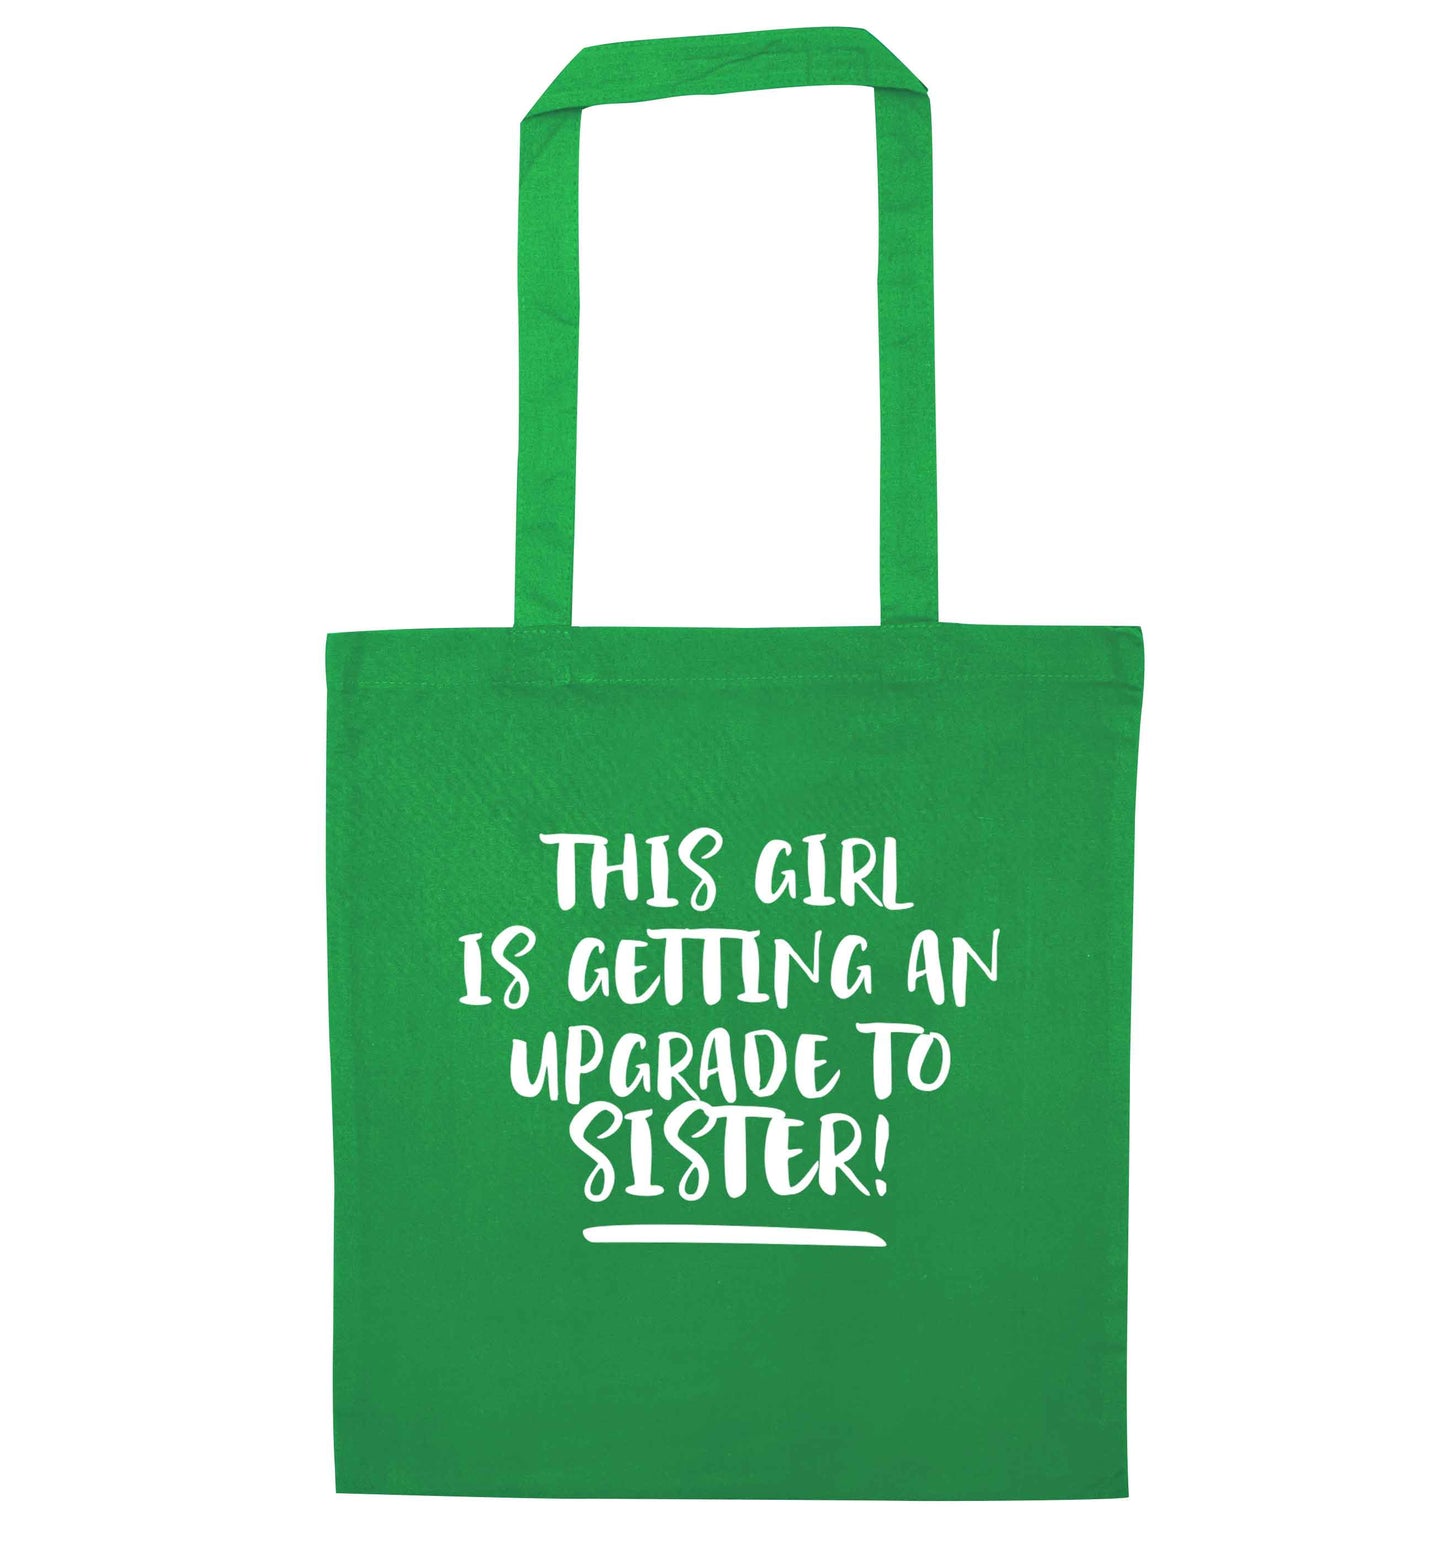 This girl is getting an upgrade to sister! green tote bag